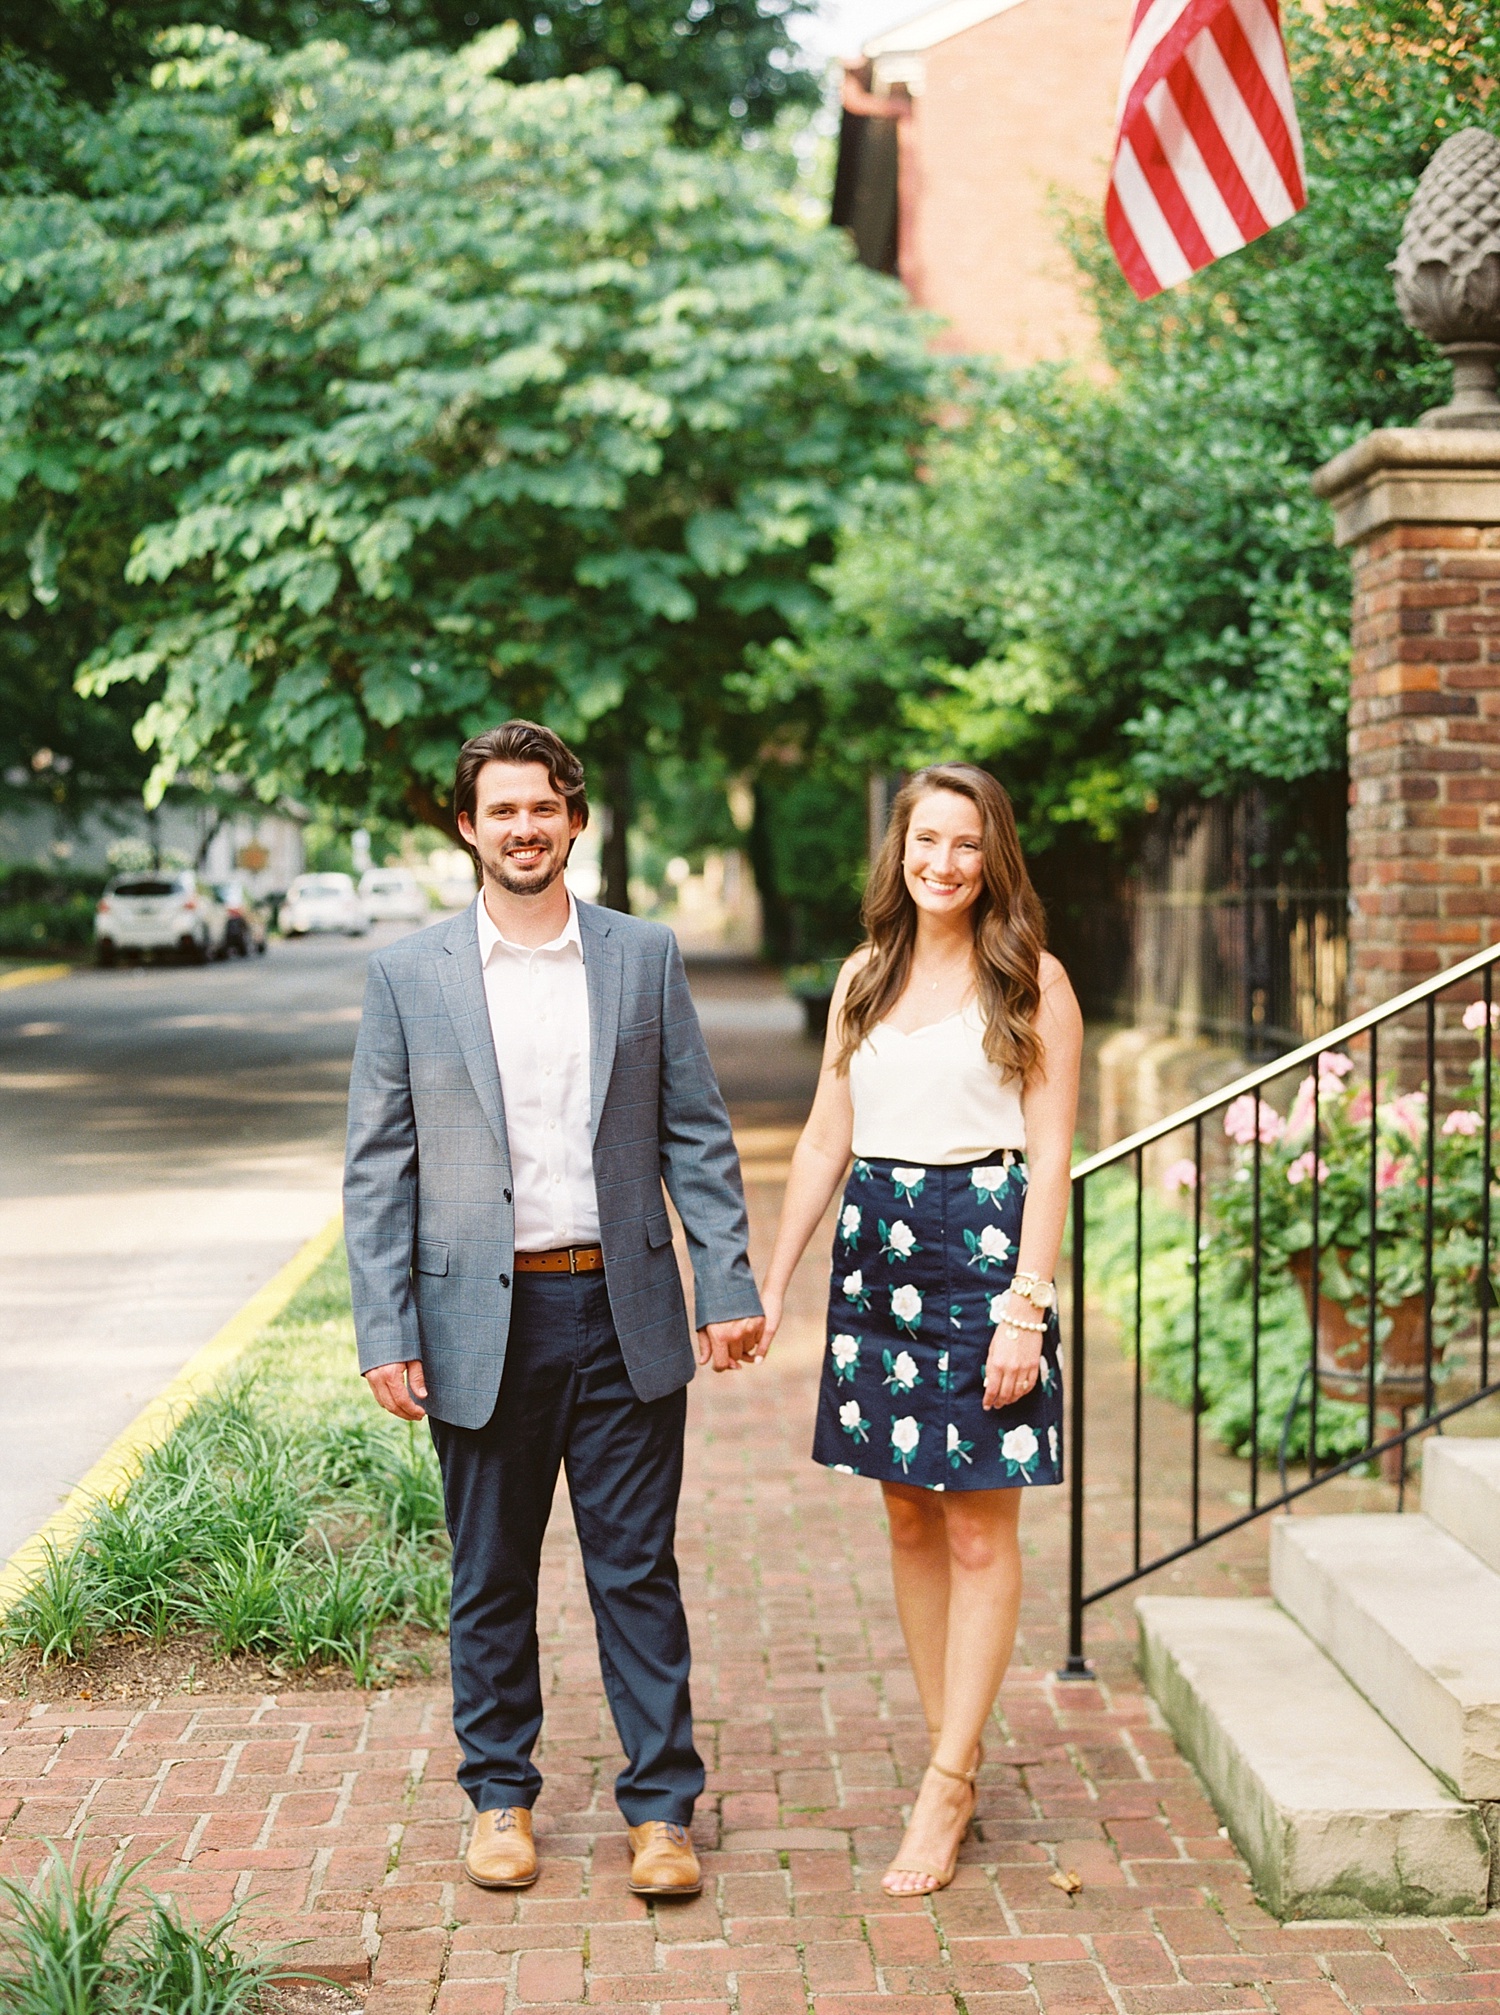 Downtown Lexington Engagement Session Talon Winery Picnic Engagement Session Gal Meets Glam Anthropologie Dress Laura Bodnar Photography Lexington Wedding Photographer Film Photography_0002-1.jpg